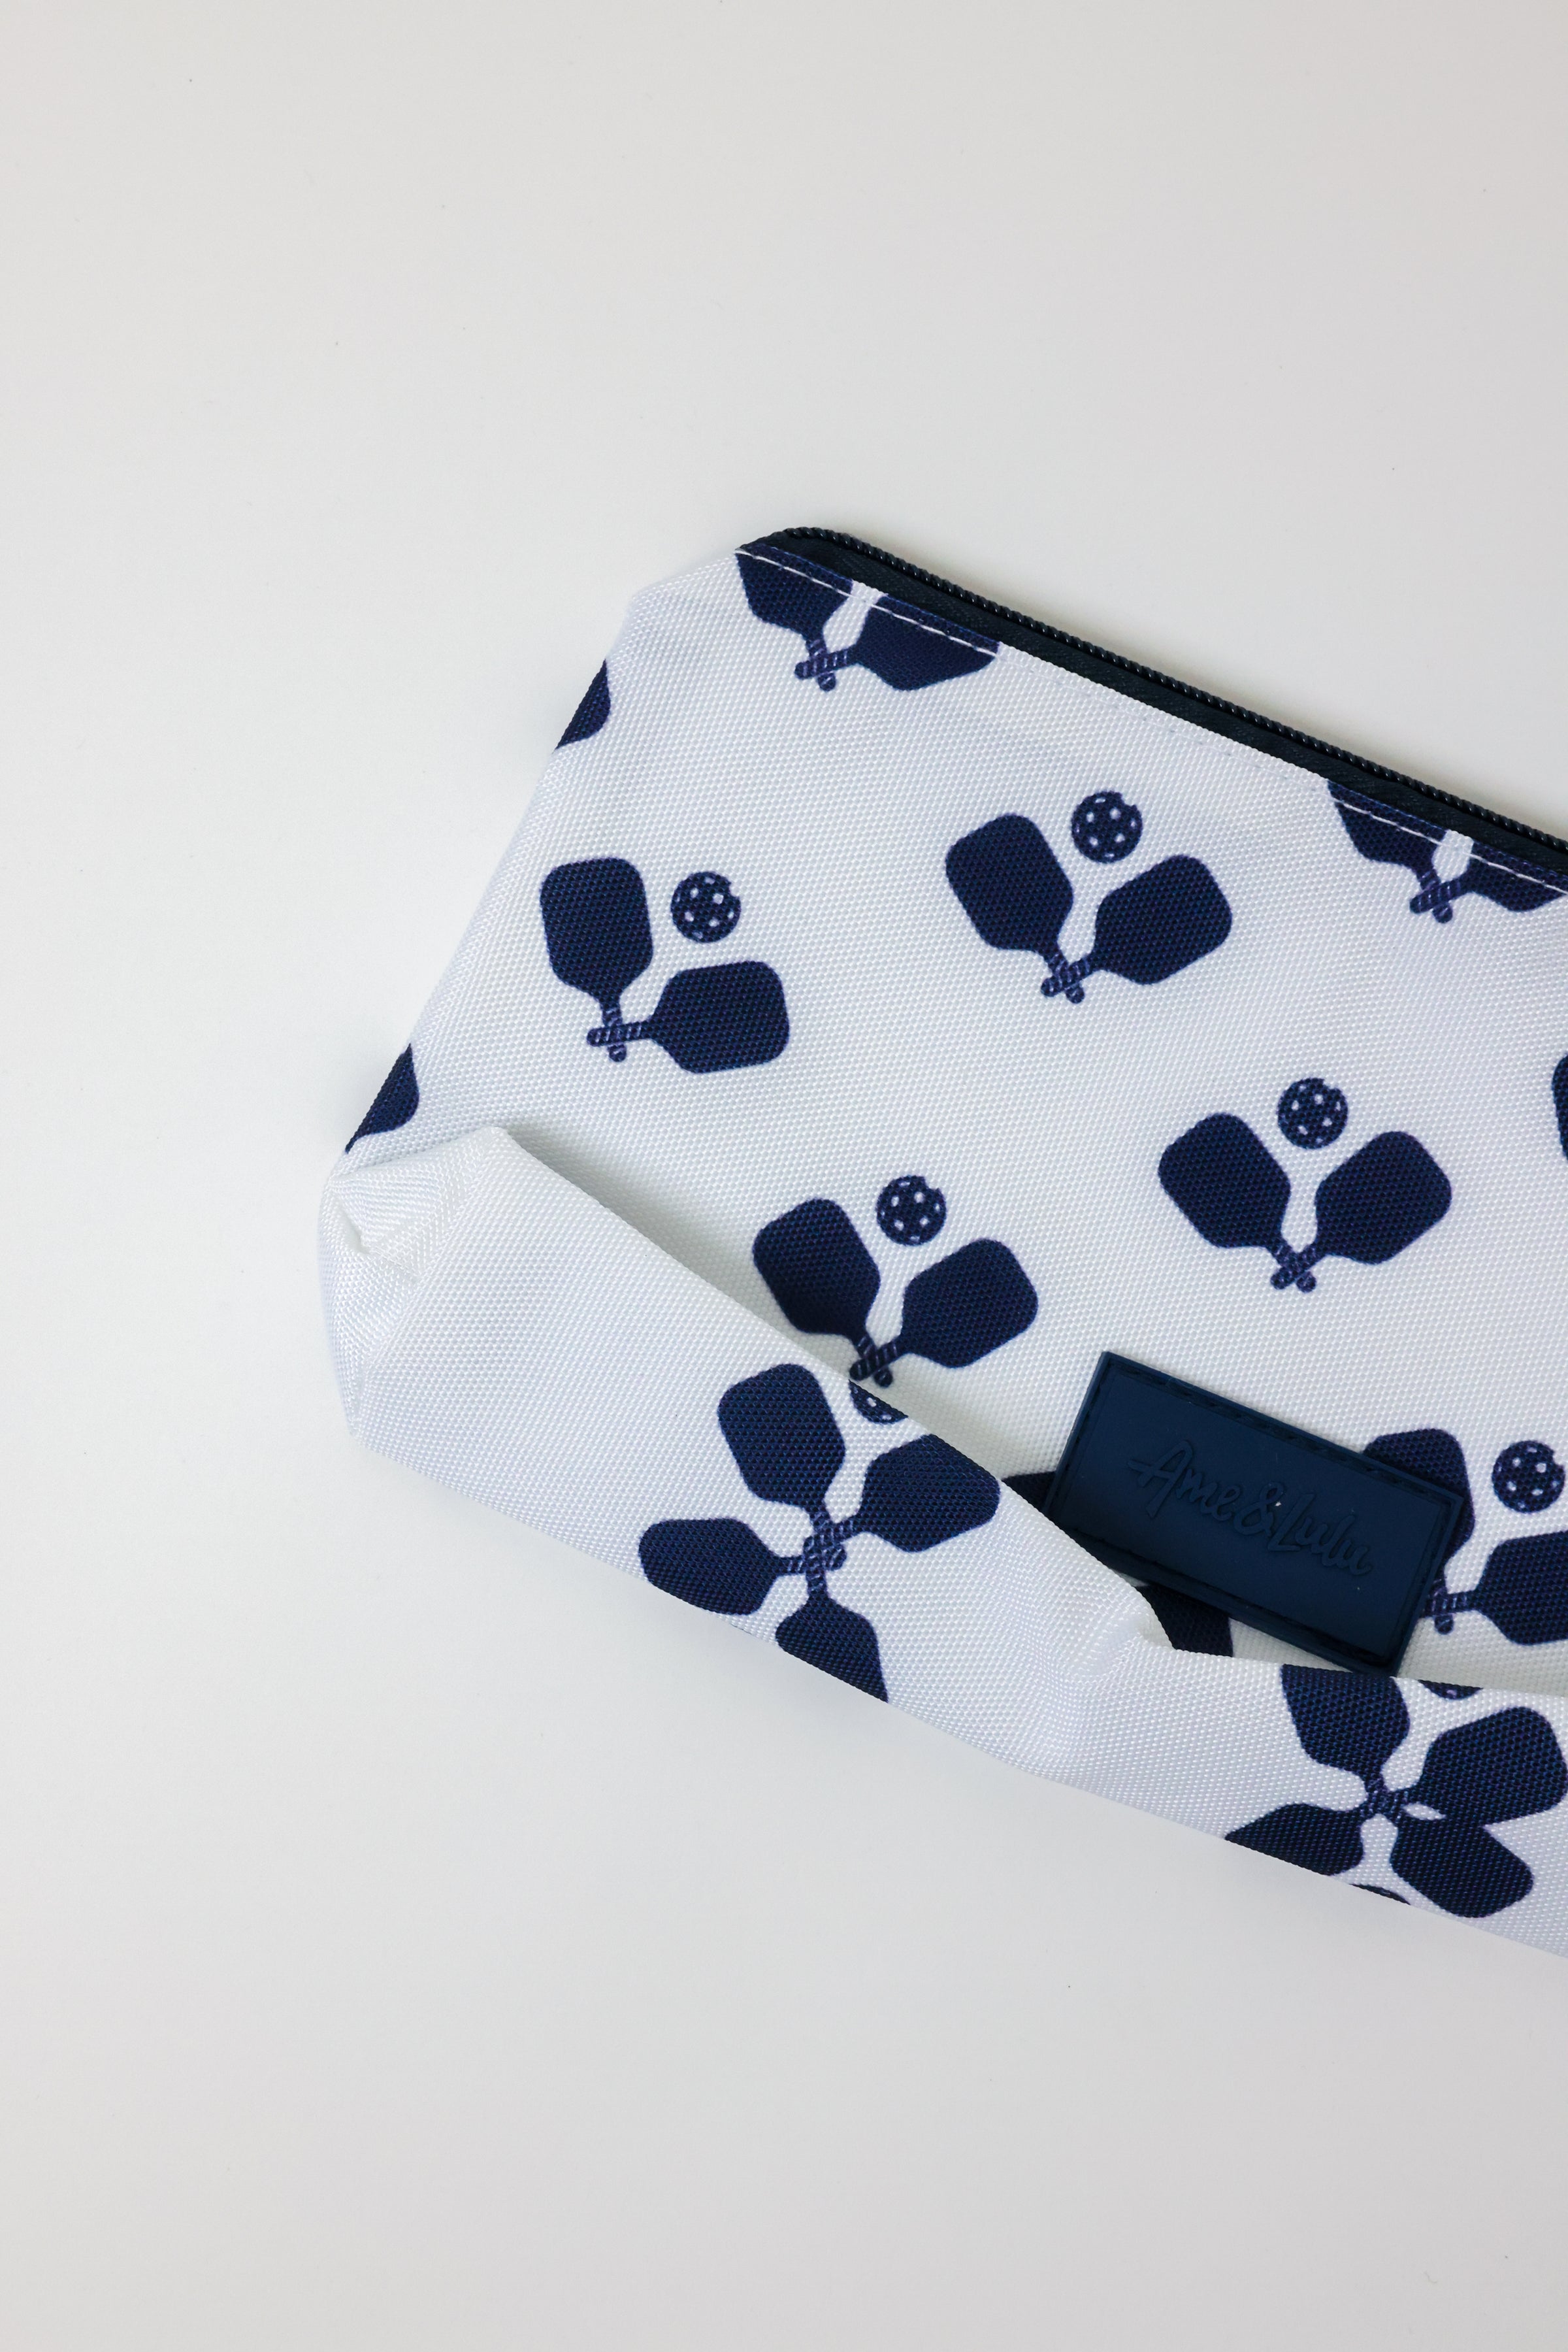 Pickleball Everyday Pouch